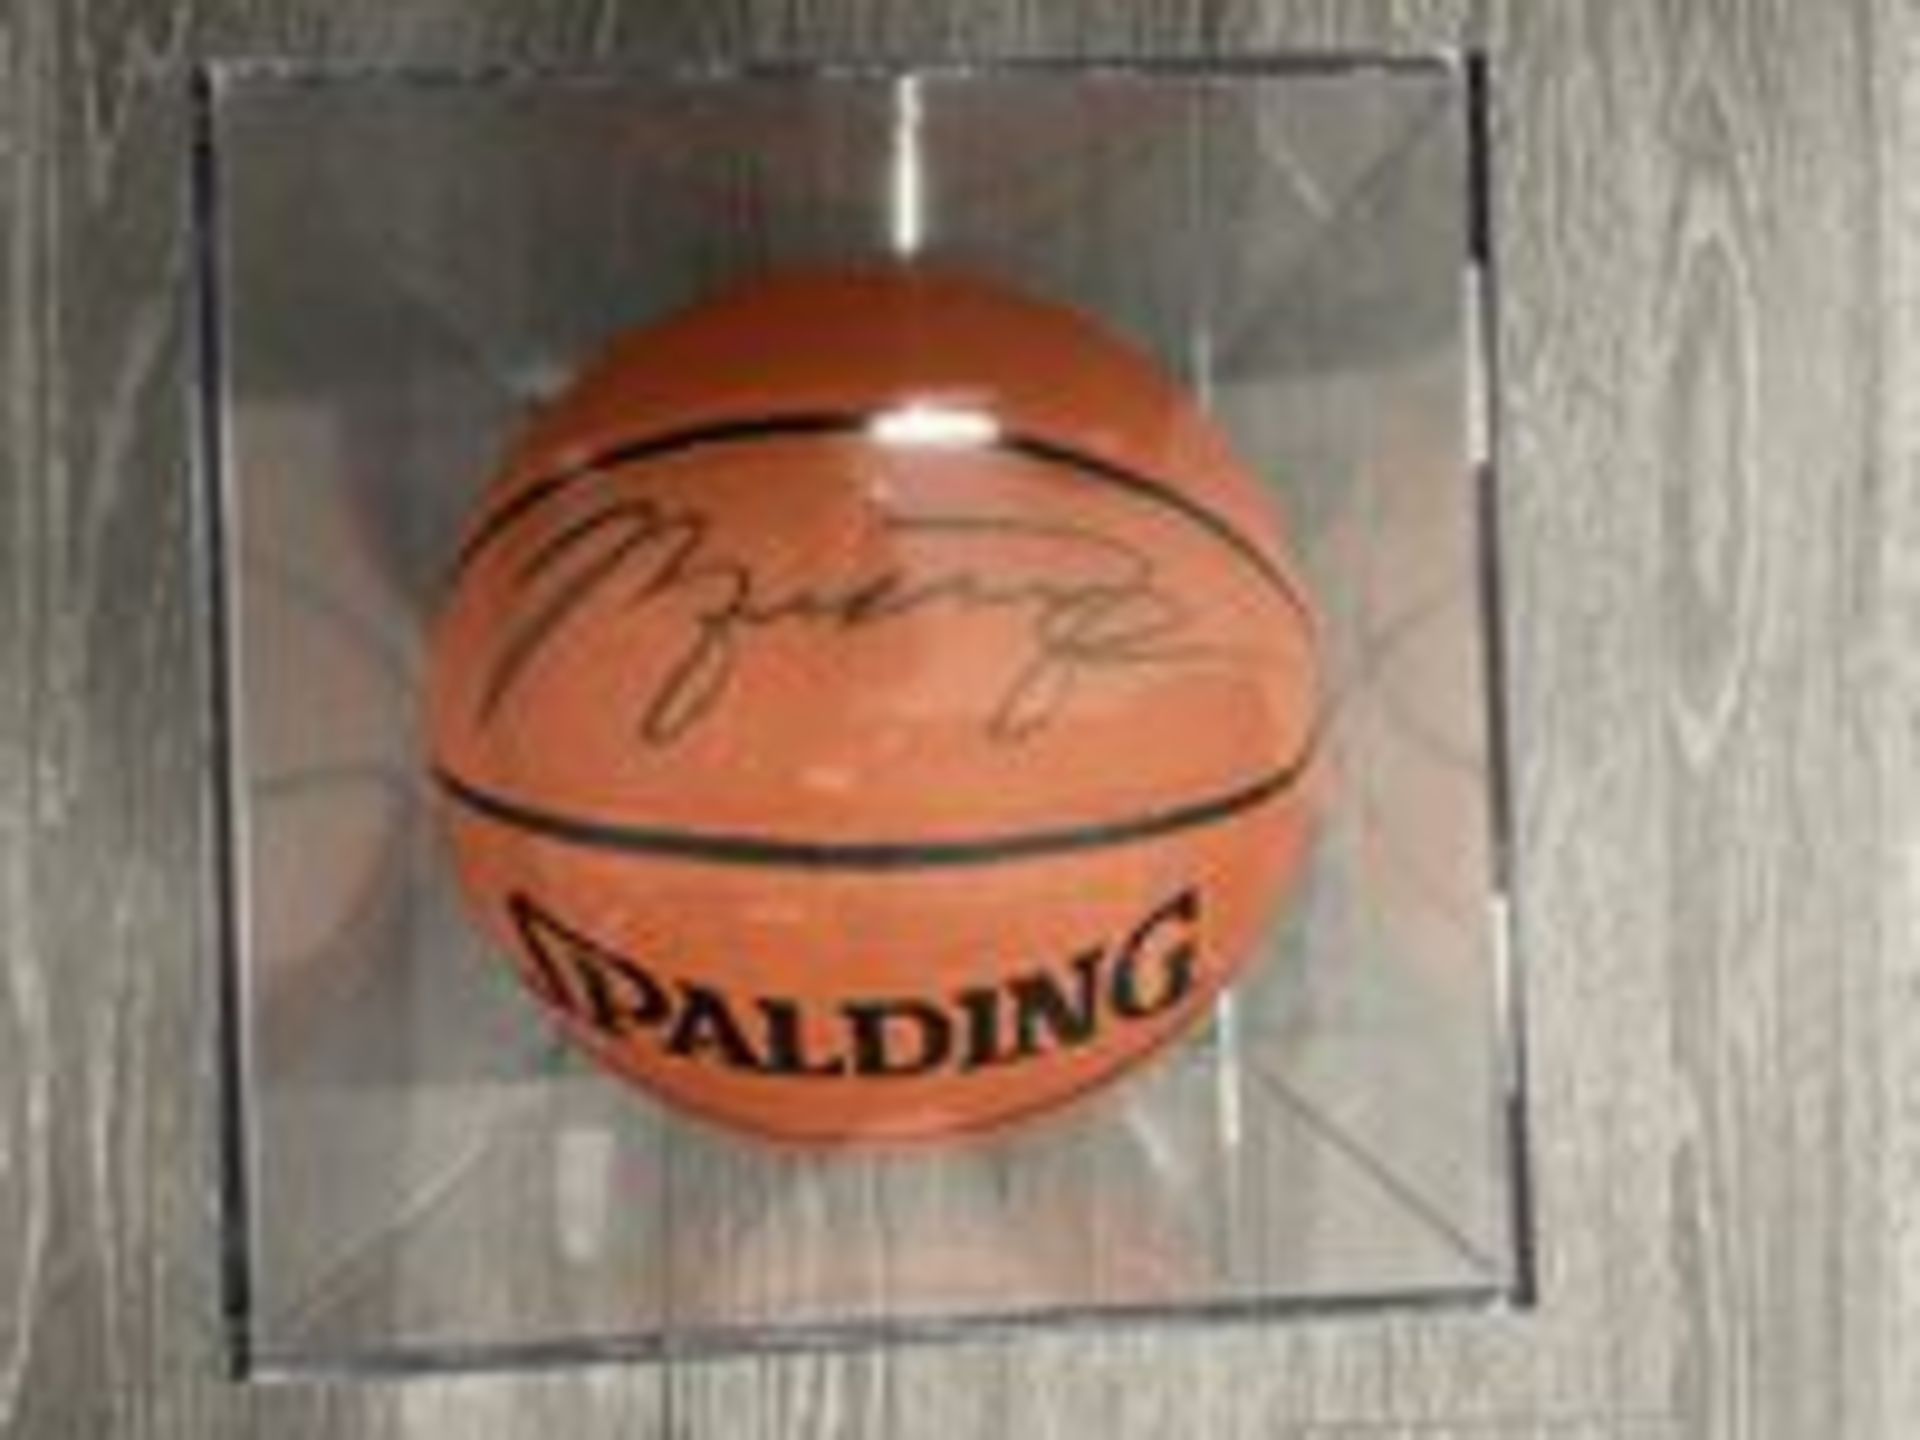 (Lot) Spalding Basketball Signed By Michael Jordan in Protective Case w/ Commemorative Plastic Cup